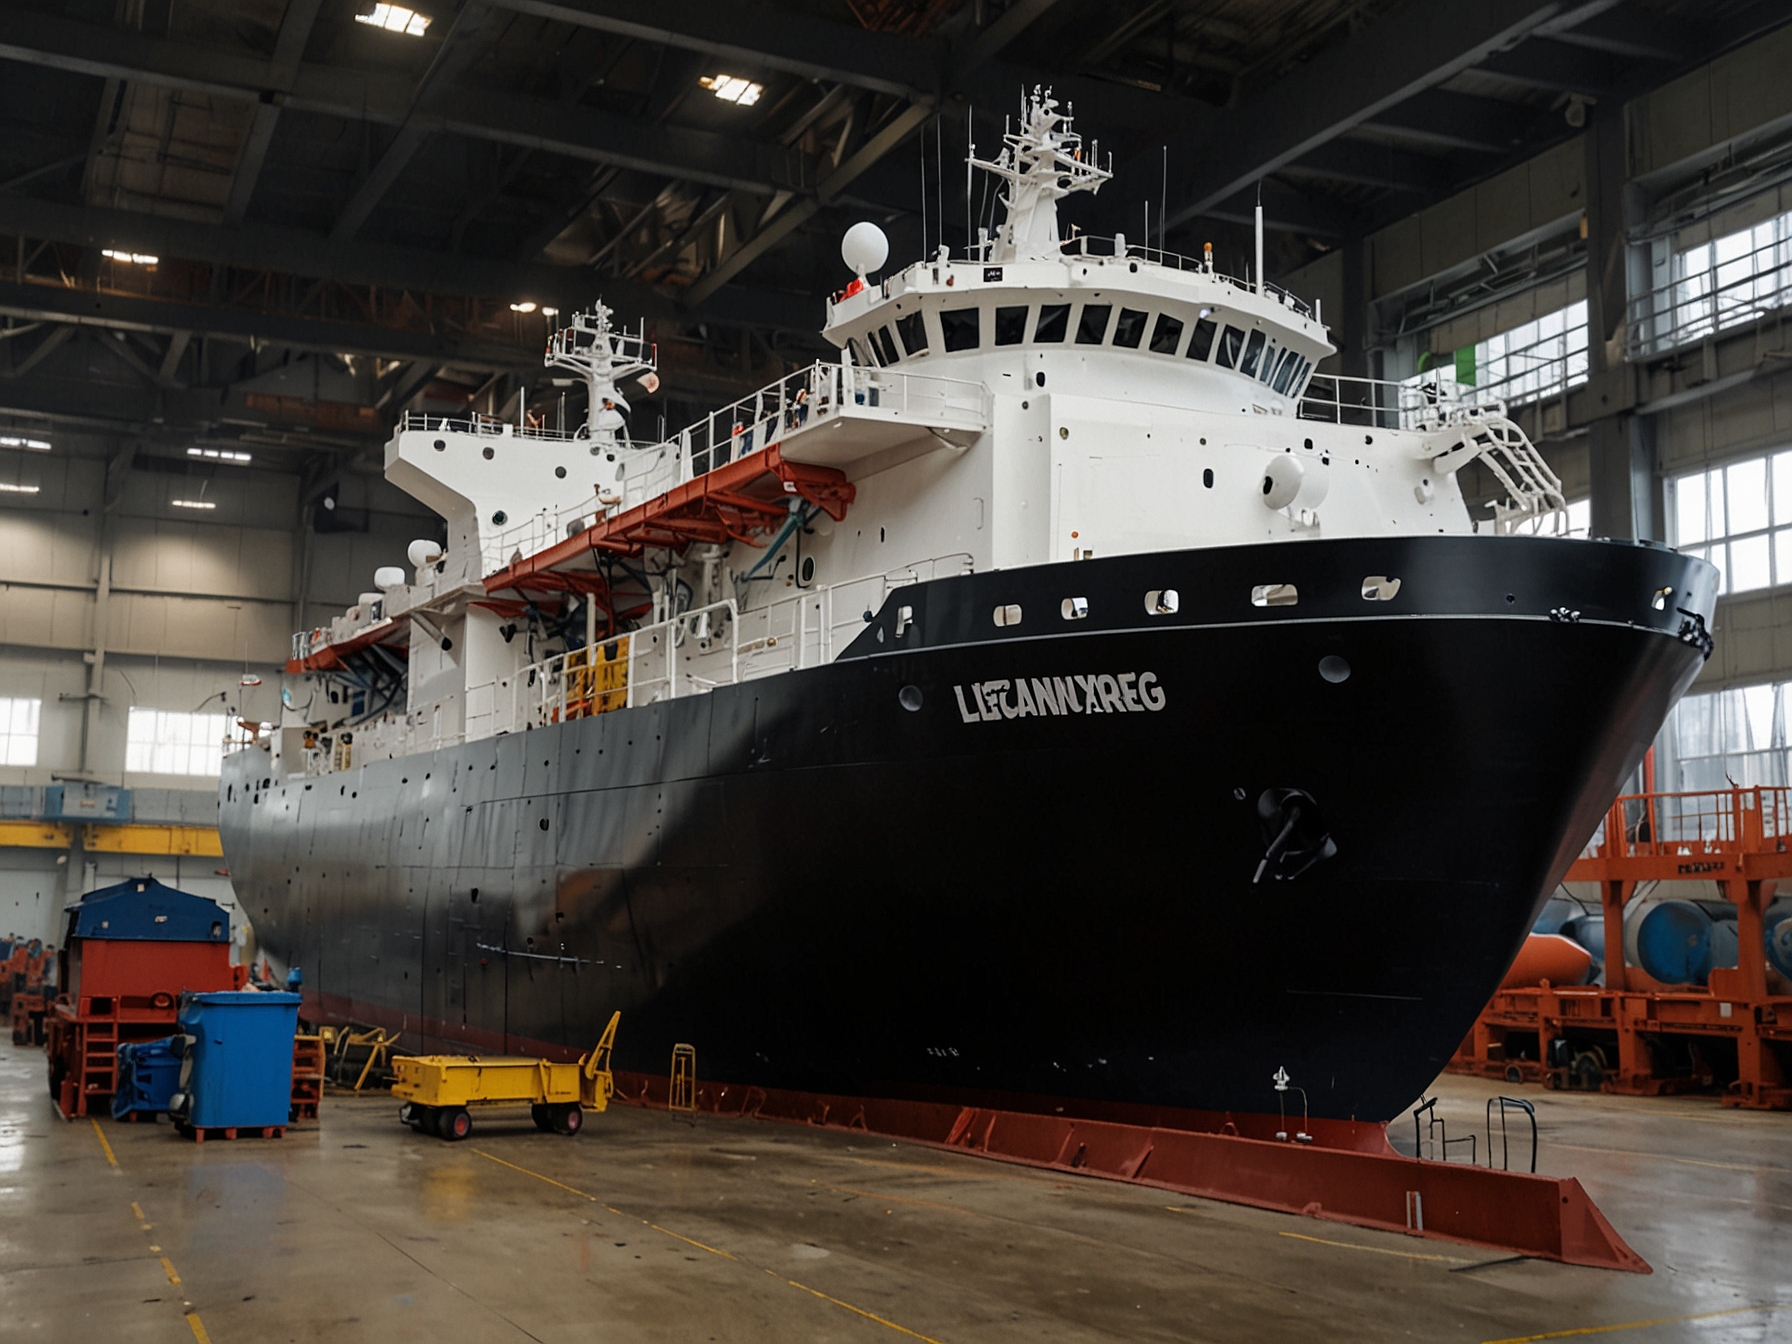 The Venture Gator, a newly launched LNG vessel, docked at the Samsung Heavy Industries shipyard in South Korea, showcasing its advanced environmental technology and innovative design.